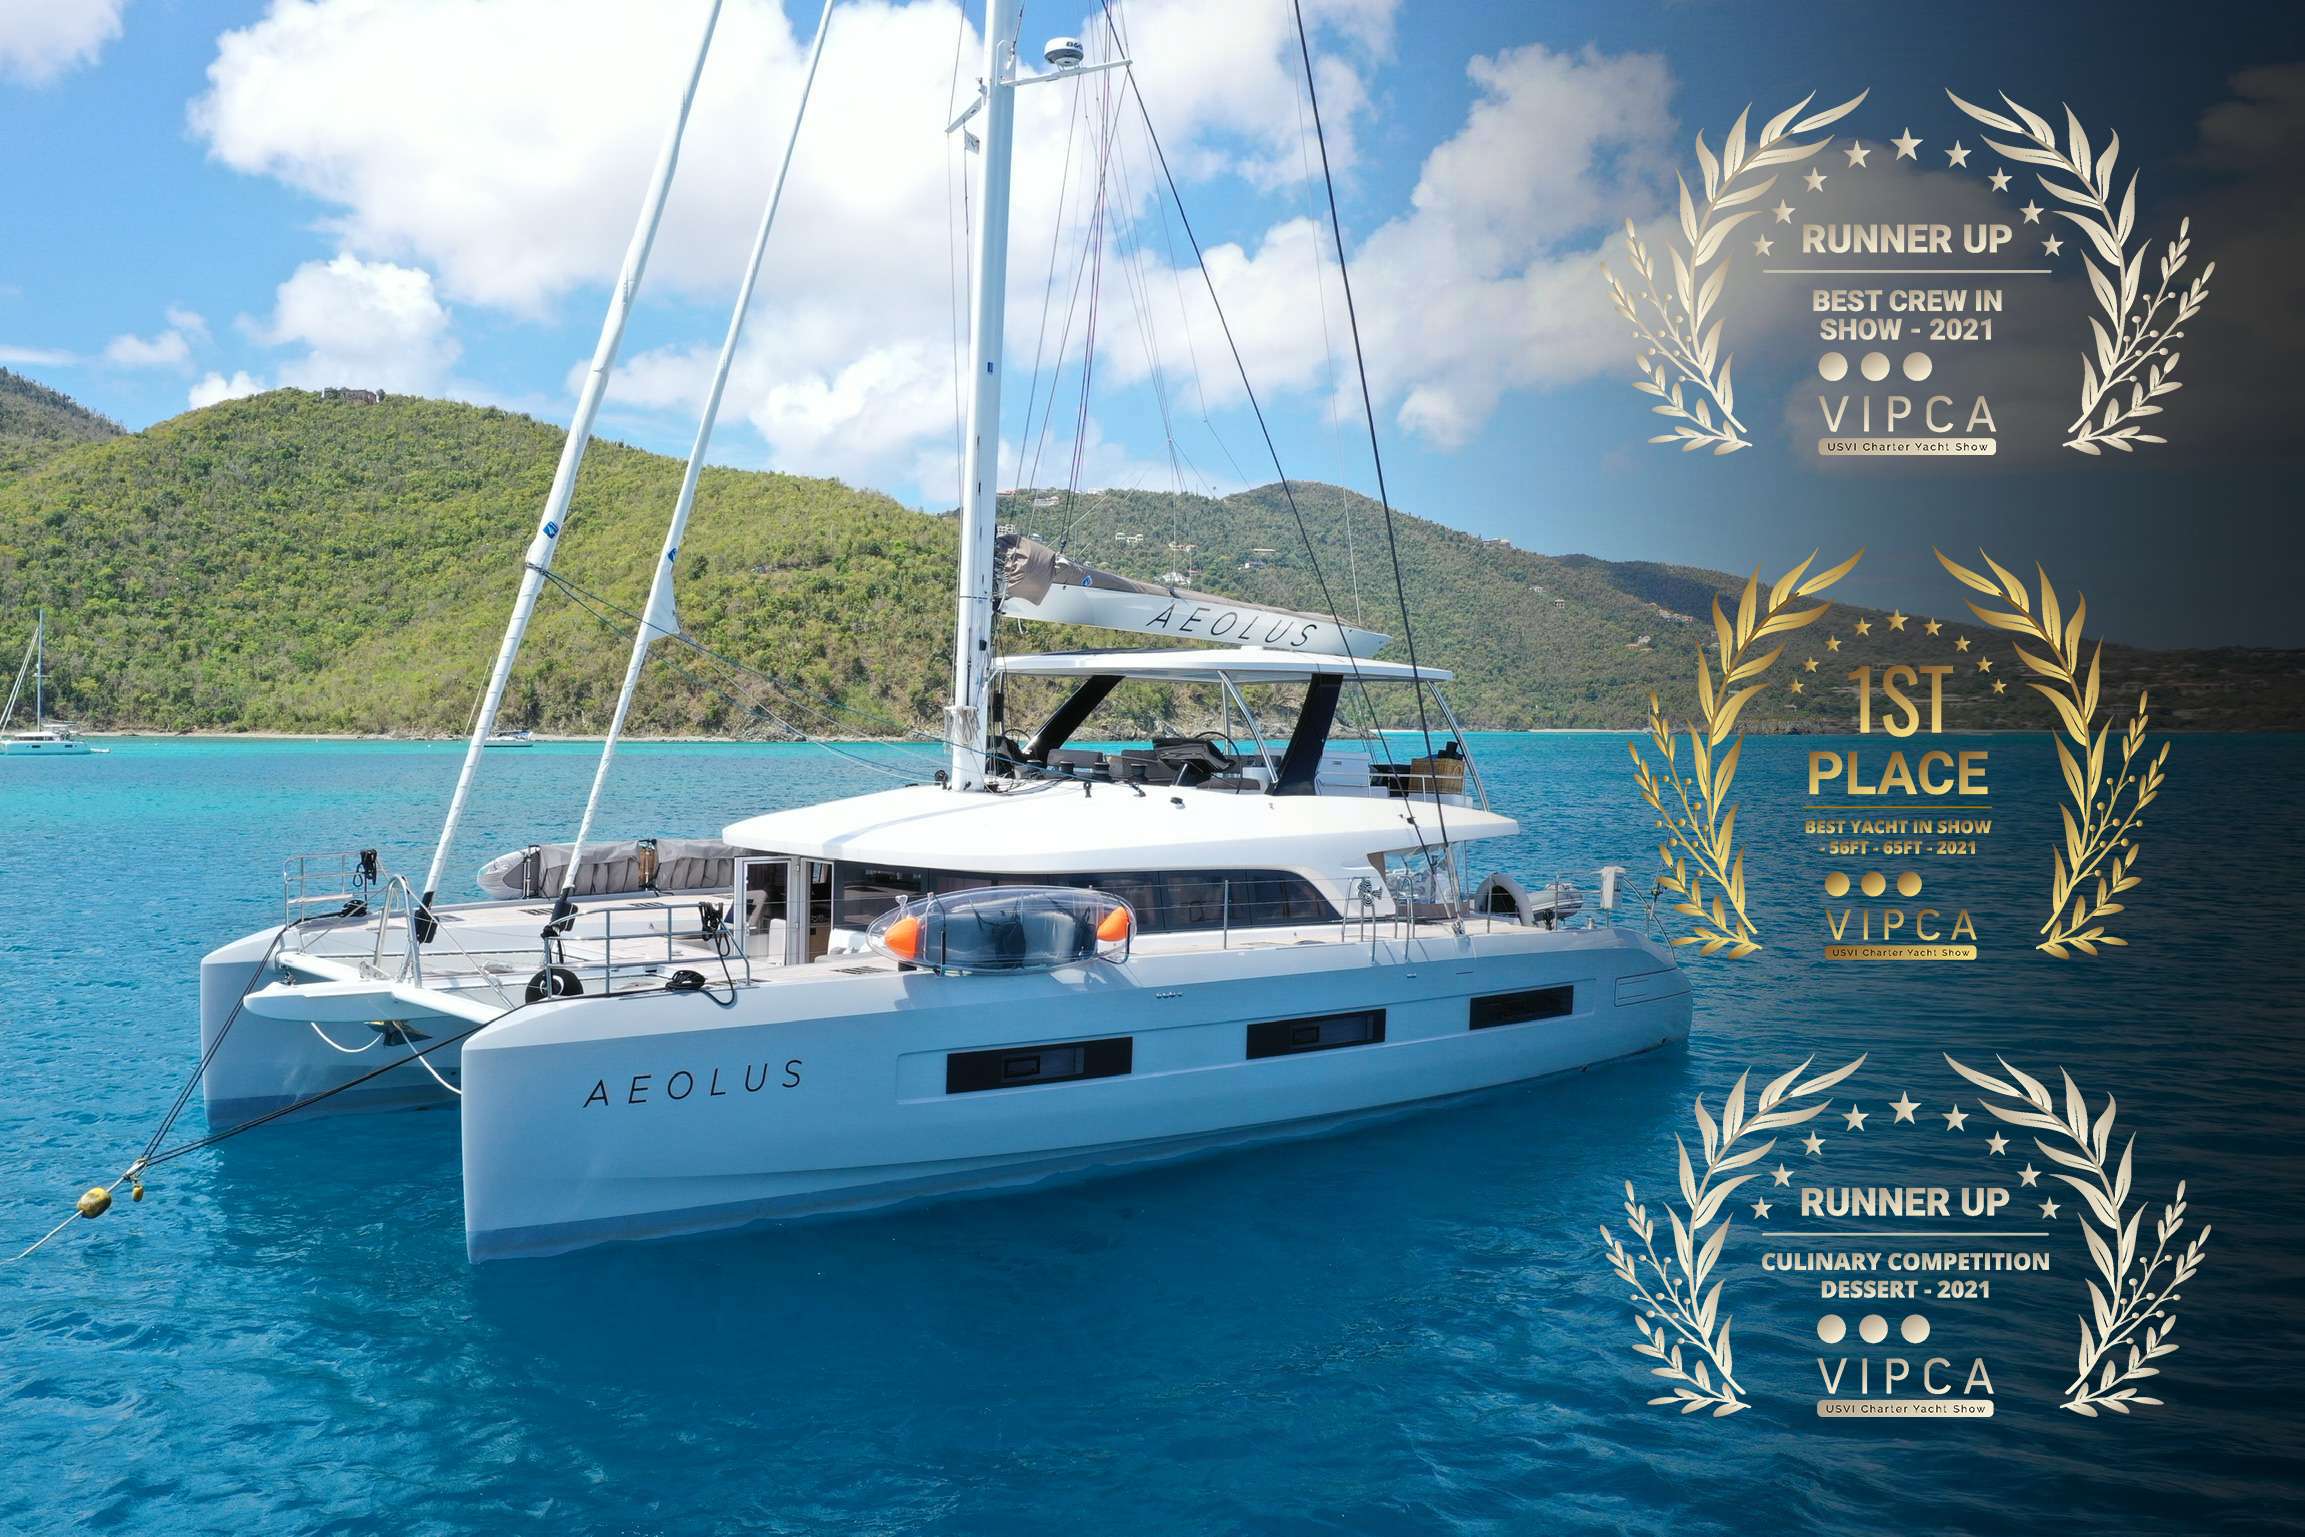 AEOLUS - Yacht Charter Netherlands Antilles & Boat hire in Caribbean 1